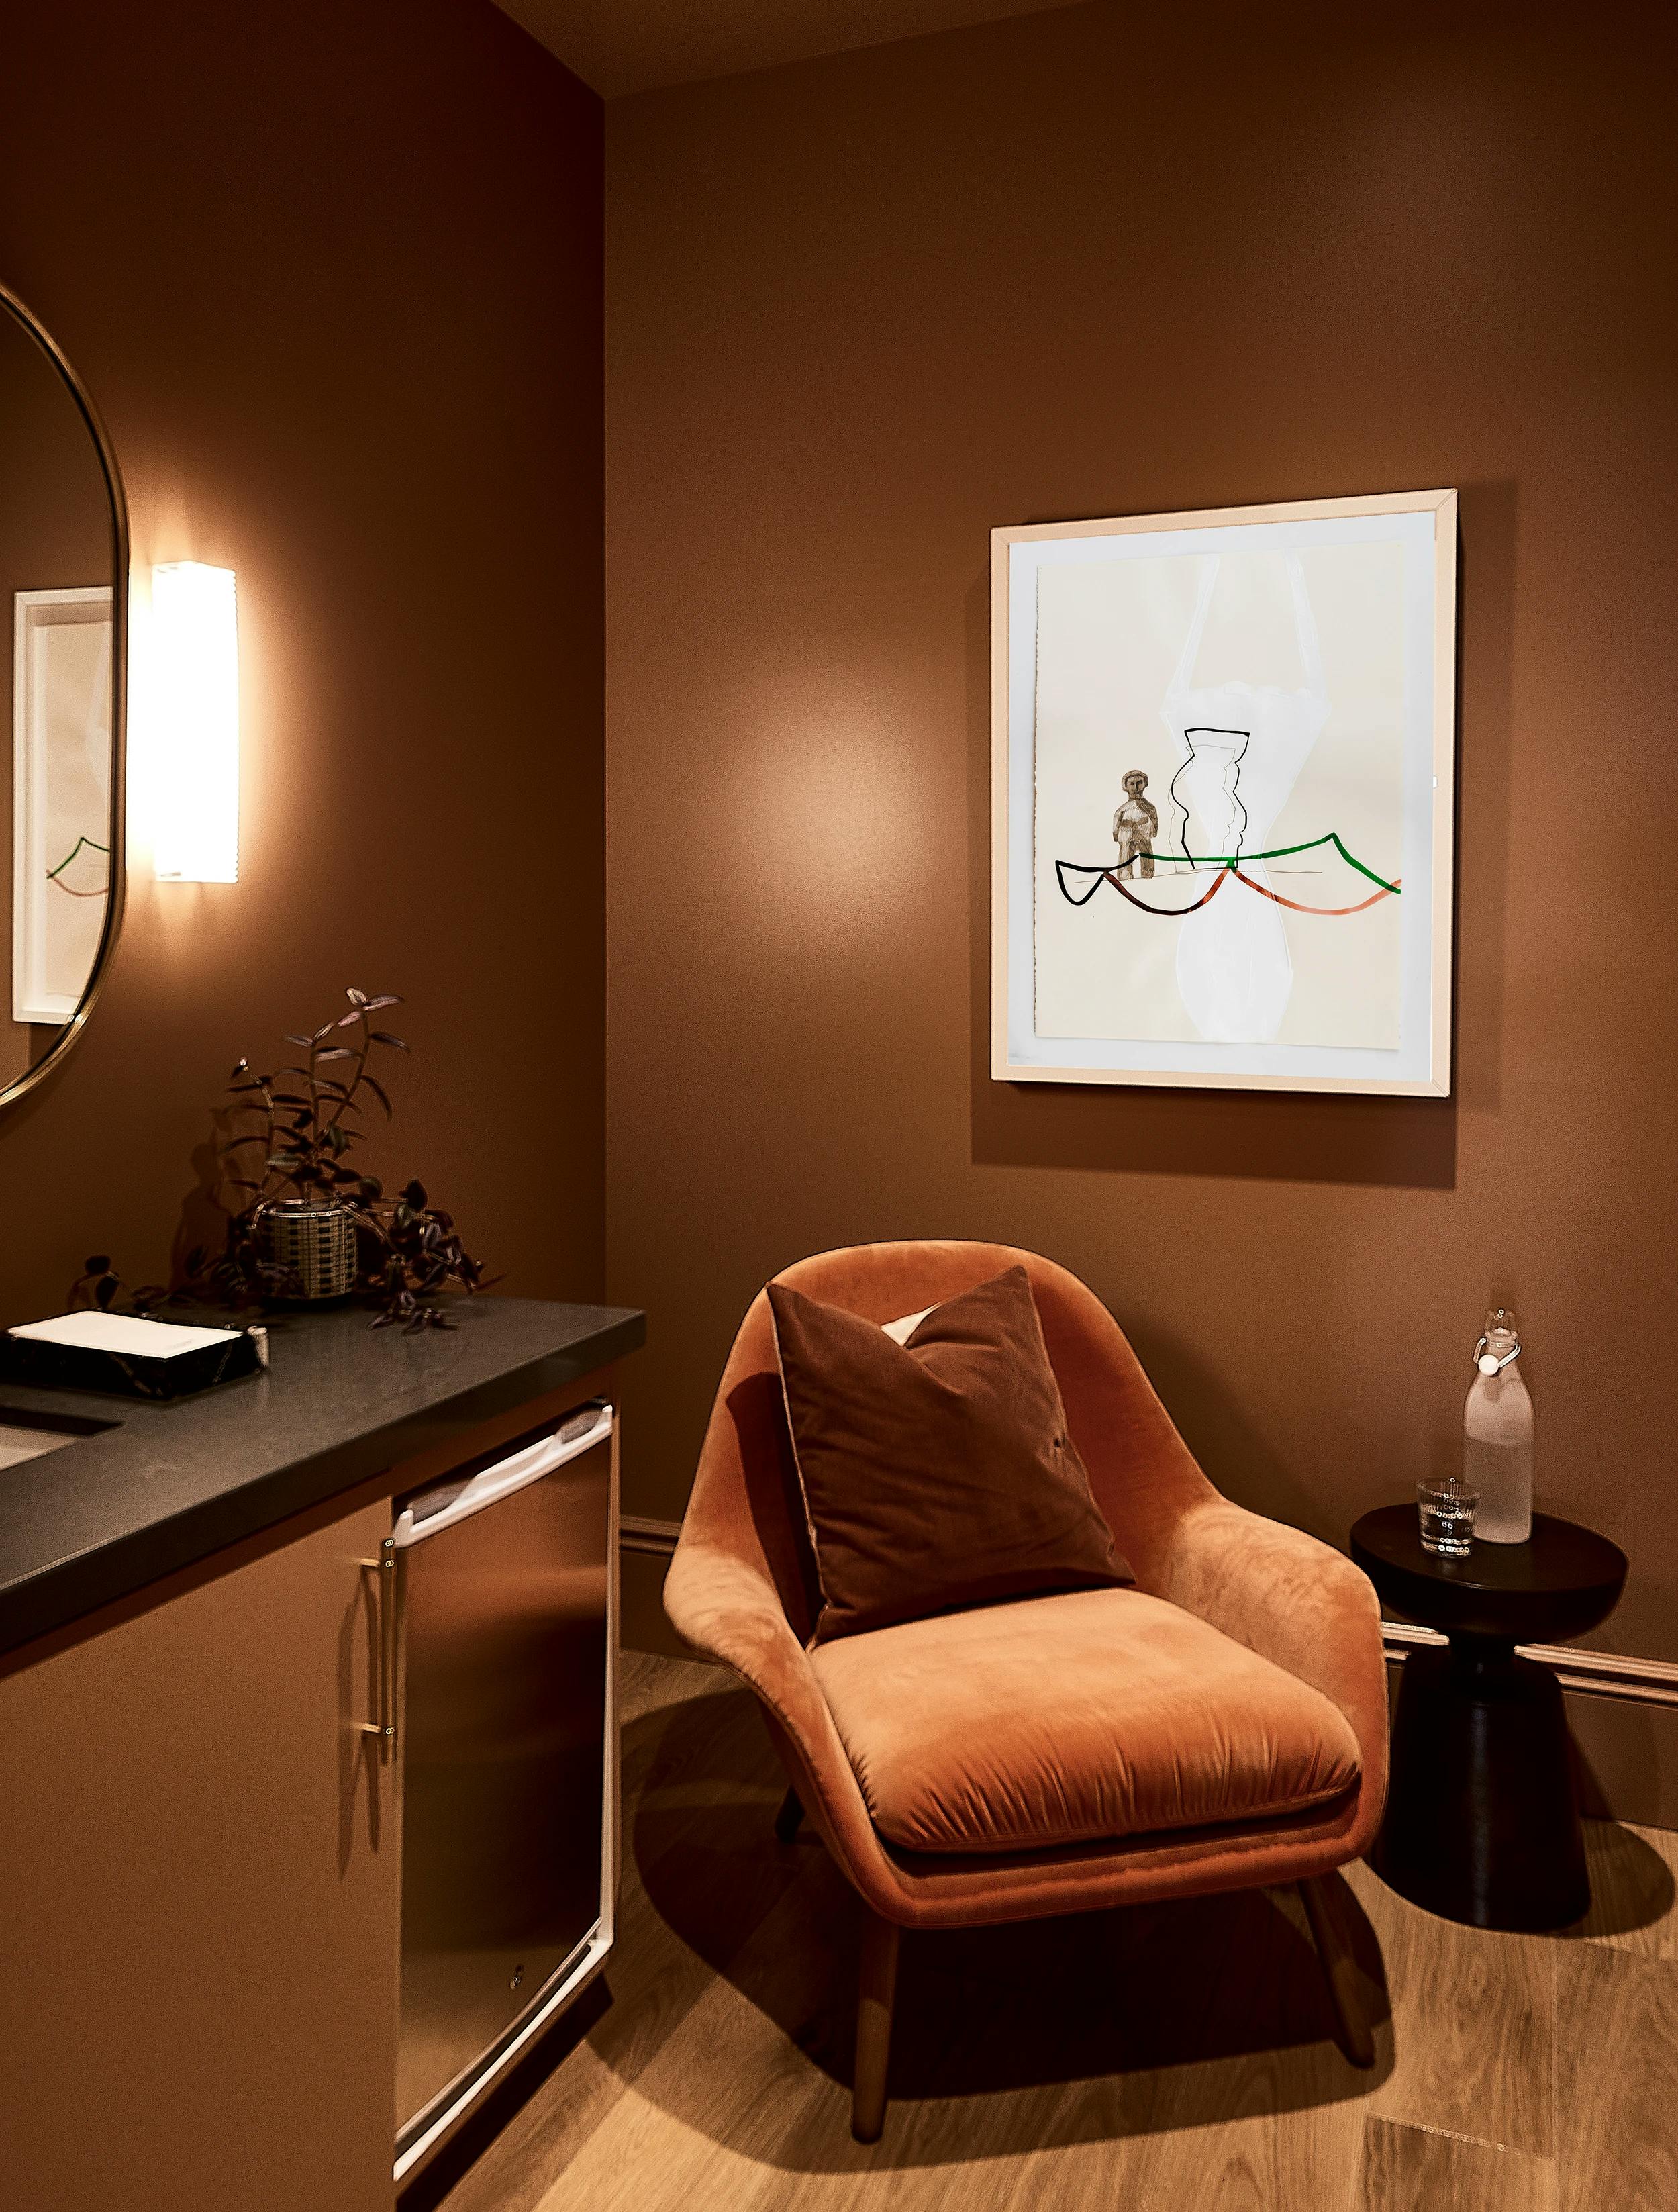 A framed abstract artwork with a figure by artist Vicki Sher on a dark brown wall above a velvet orange chair in the Chief San Francisco clubhouse.